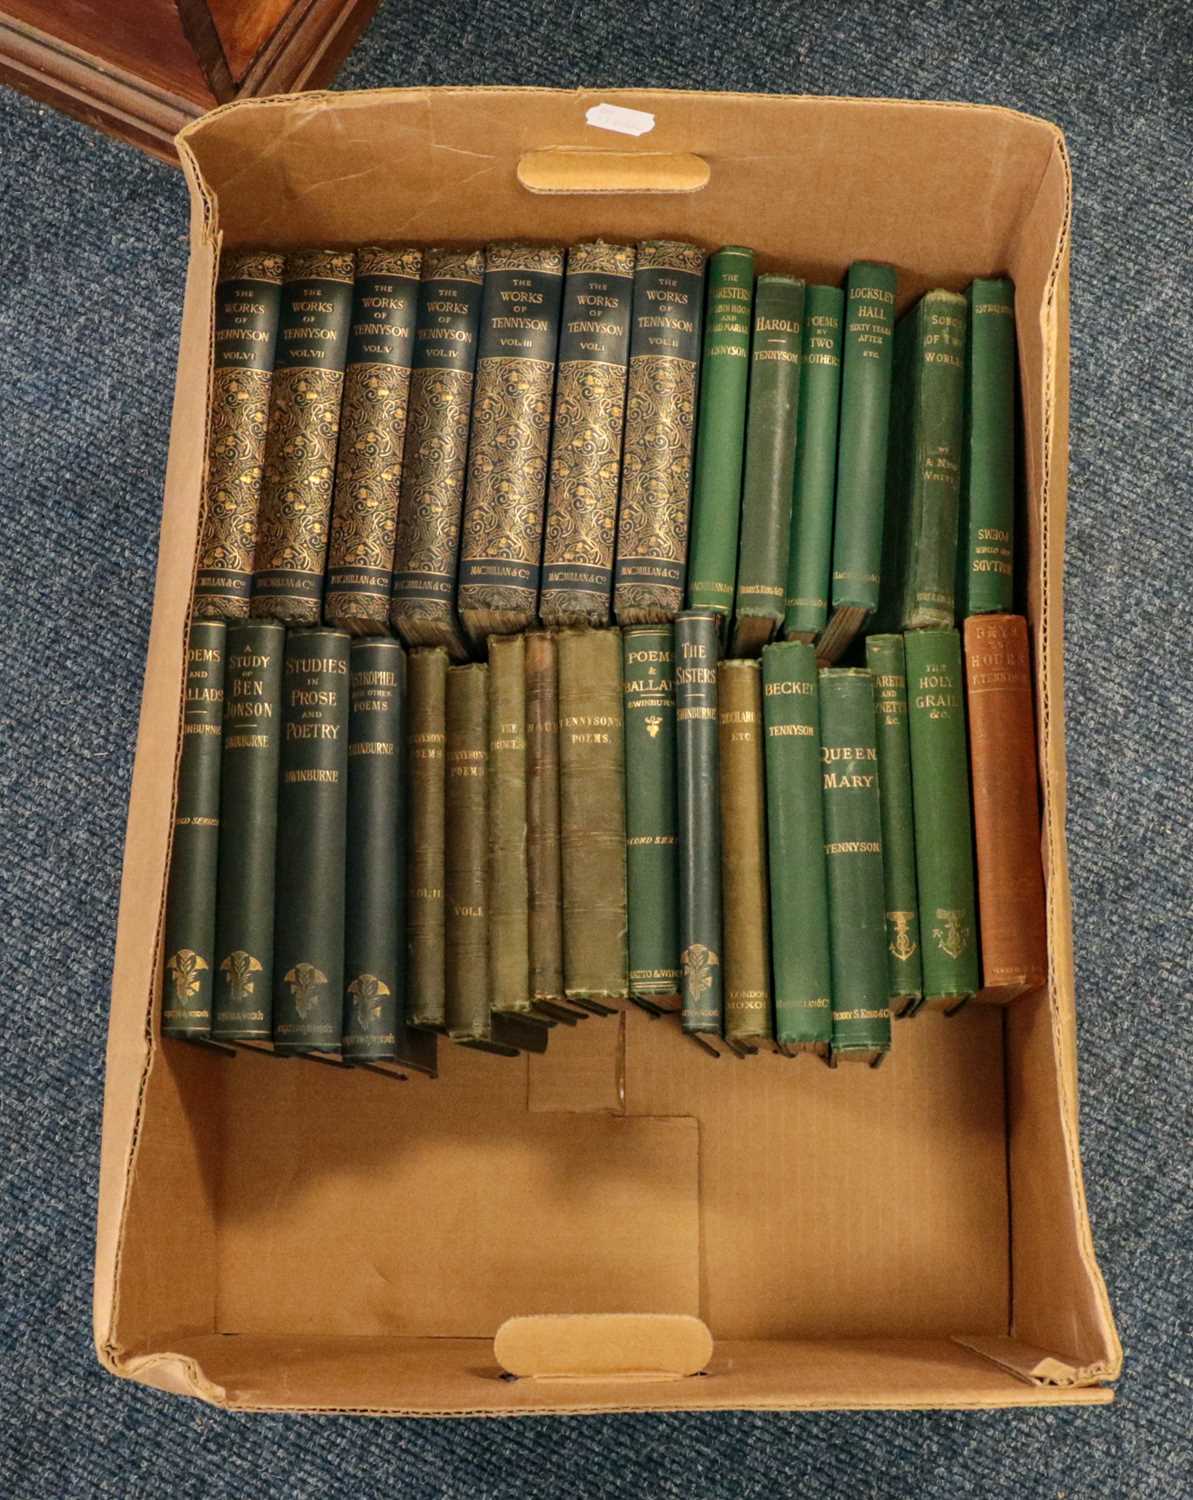 Tennyson (Alfred, Lord). A collection of works, 19th century, all in original cloth, and including